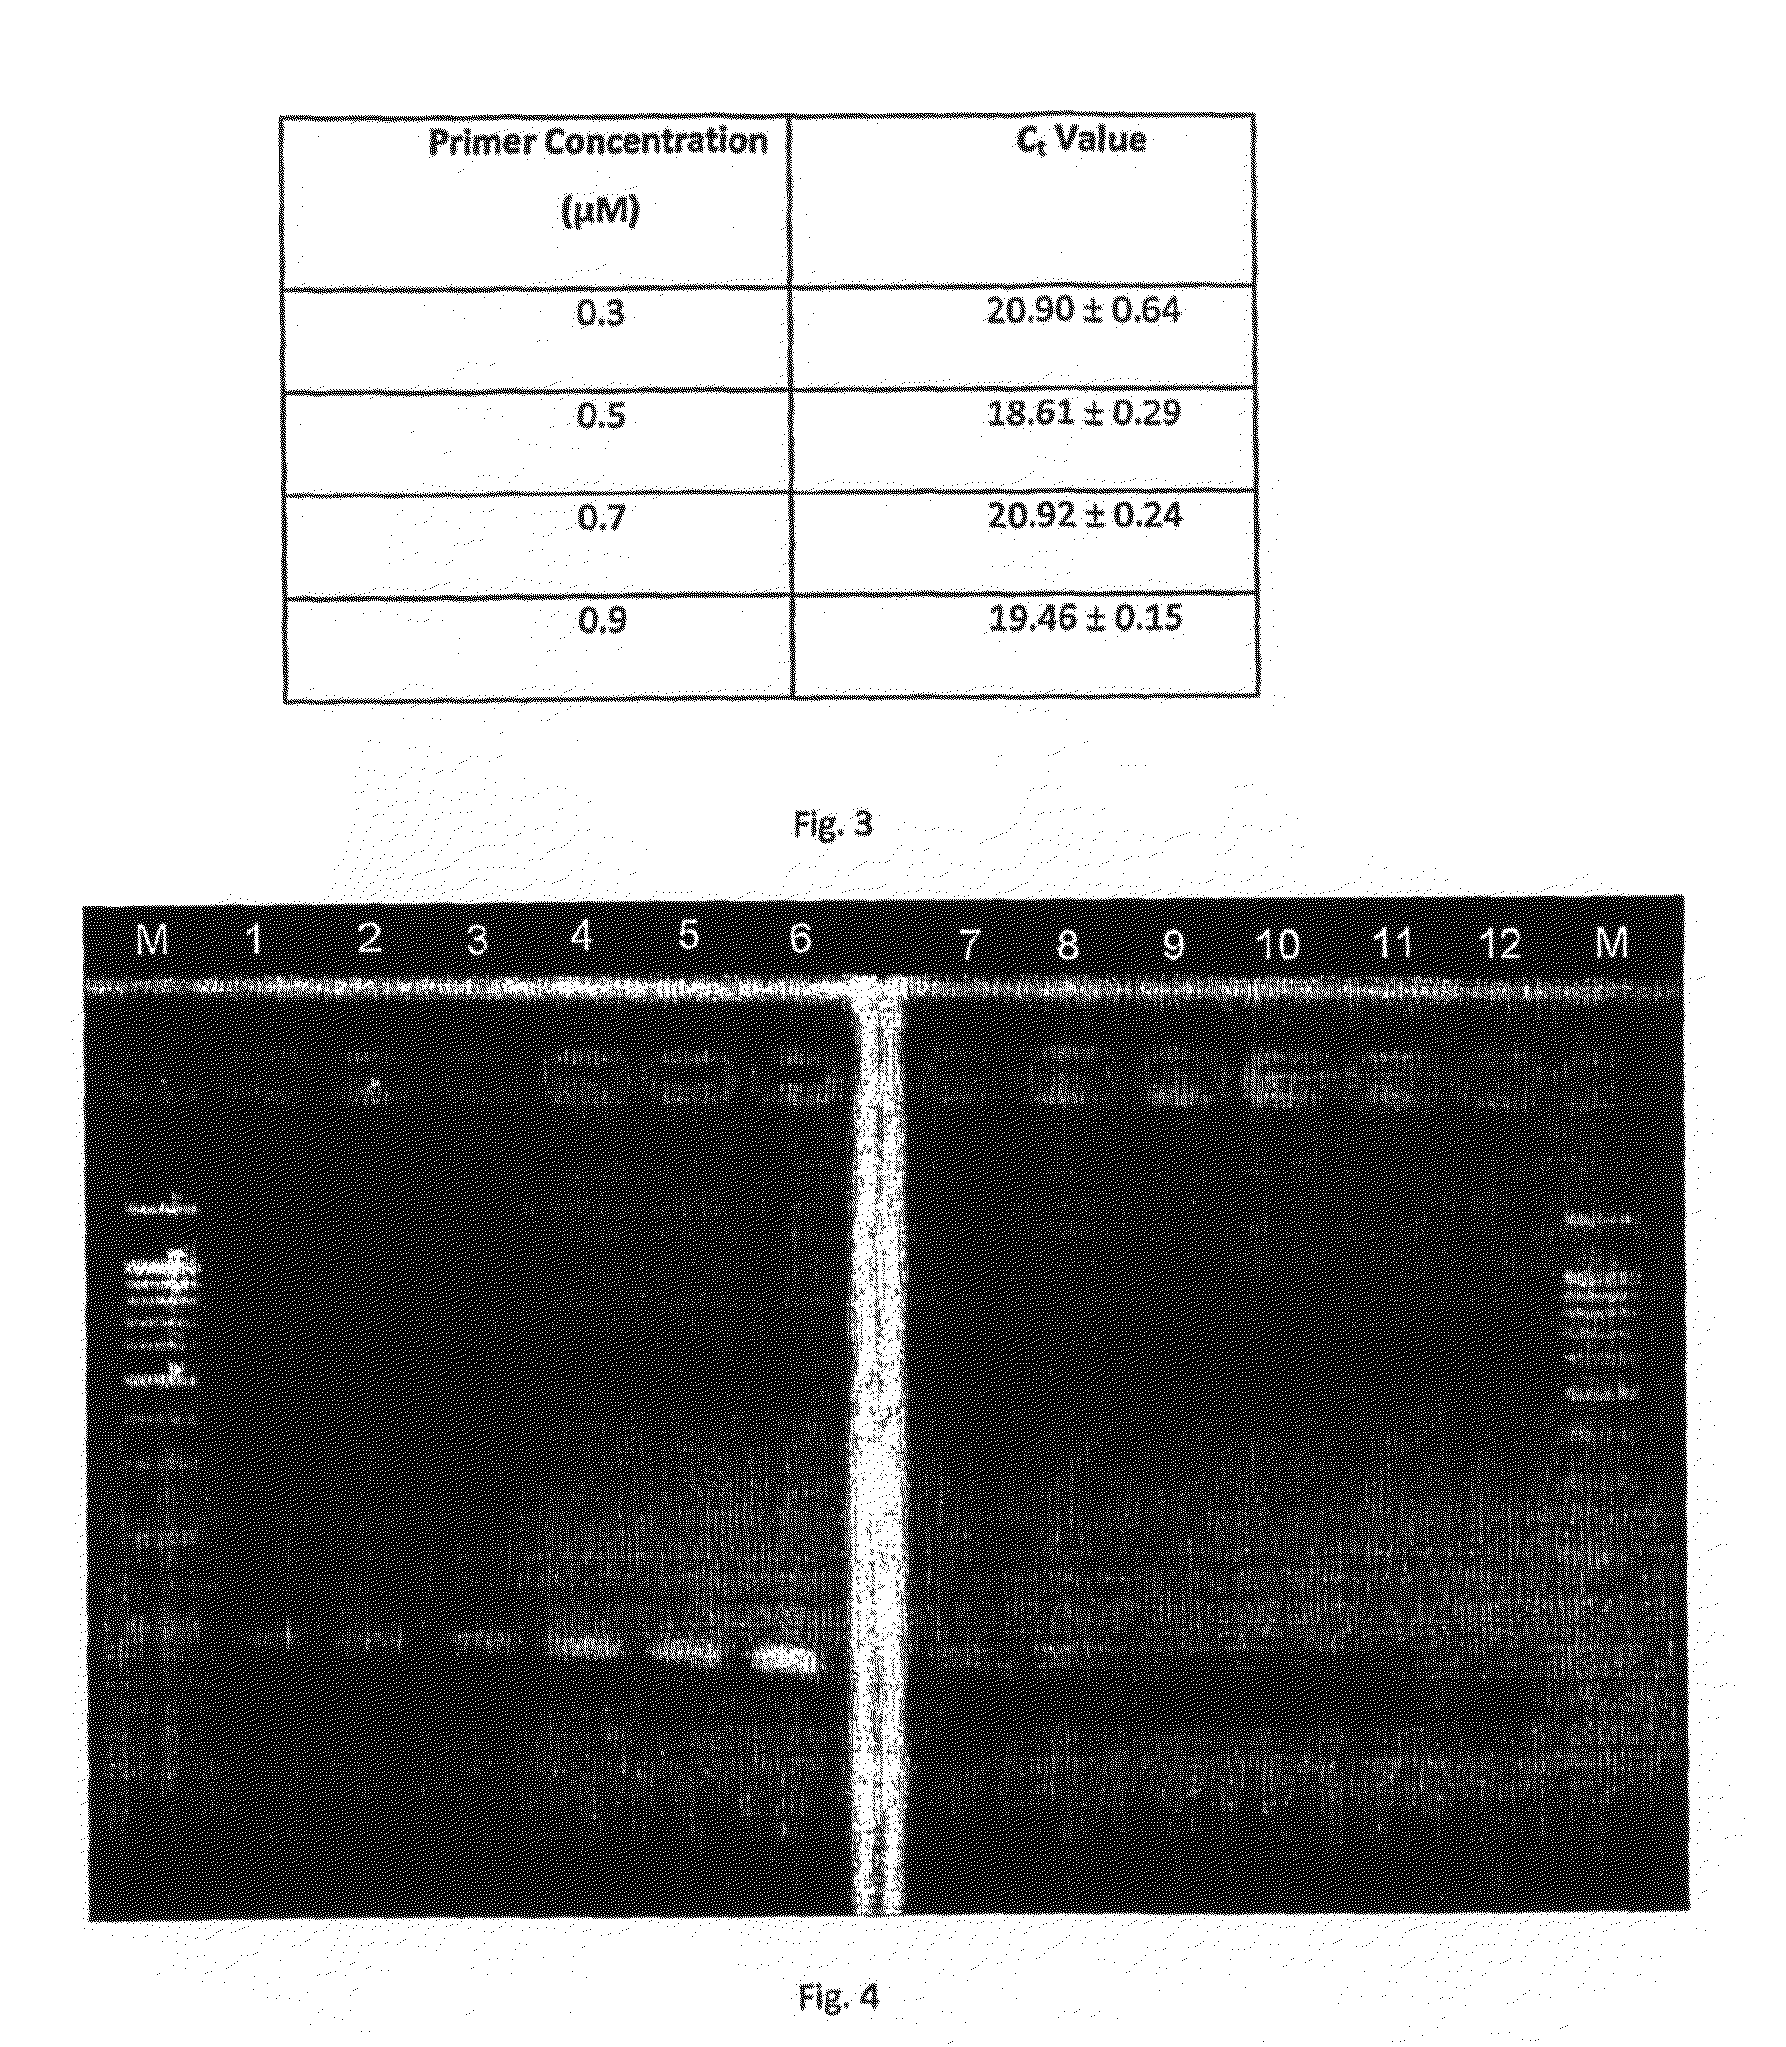 Method for identifying a pork content in a food